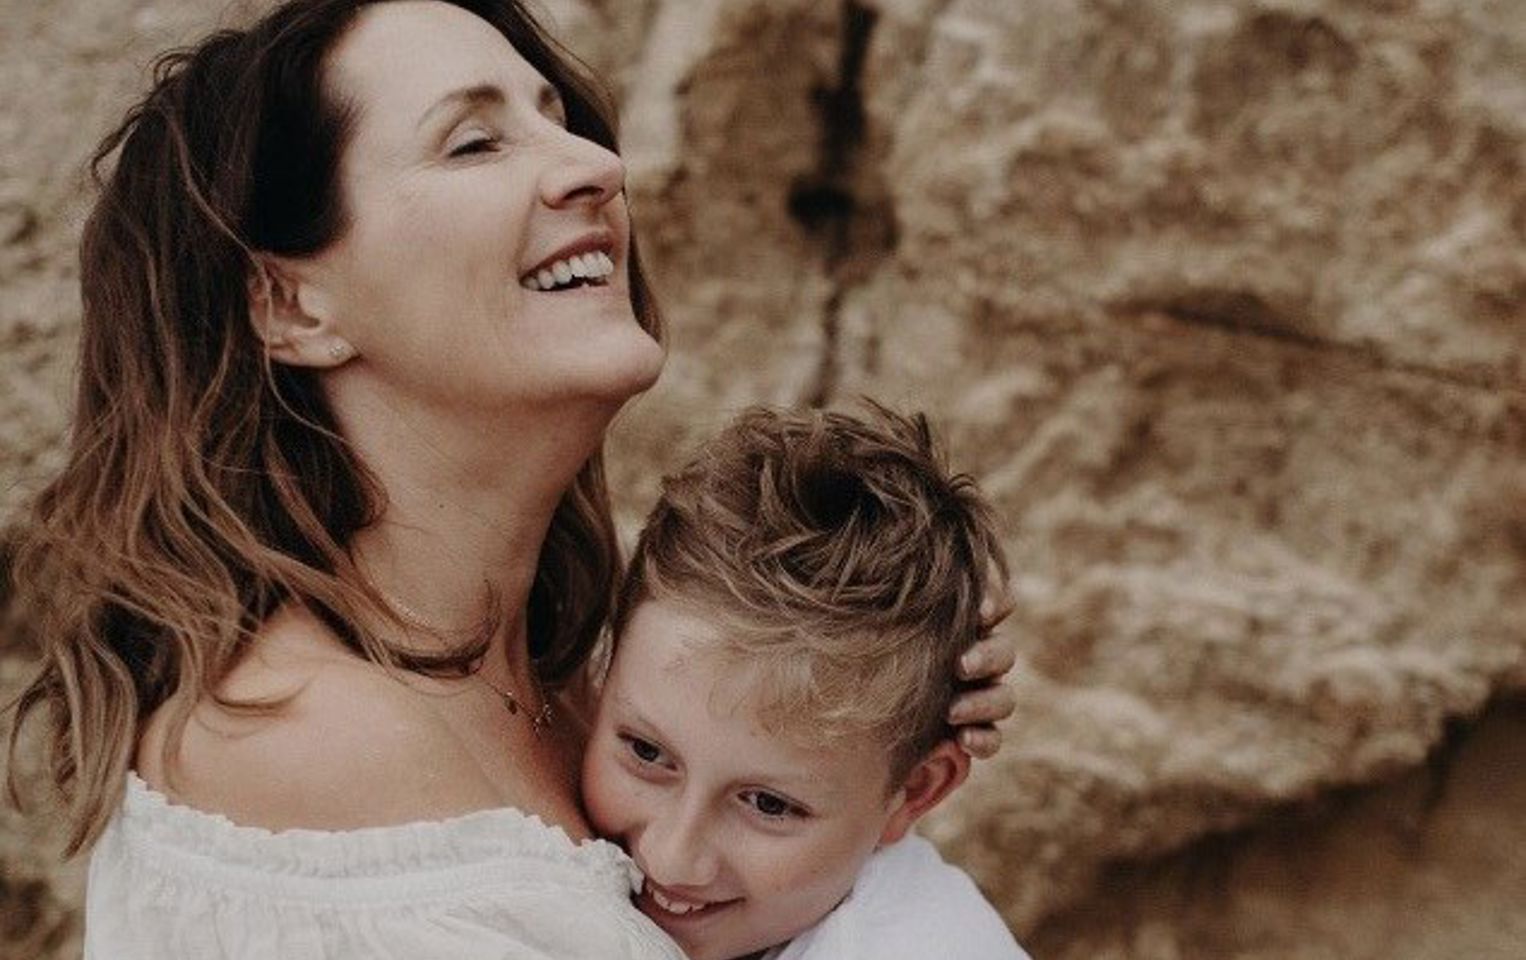 Woman with metastatic breast cancer hugging son on beach